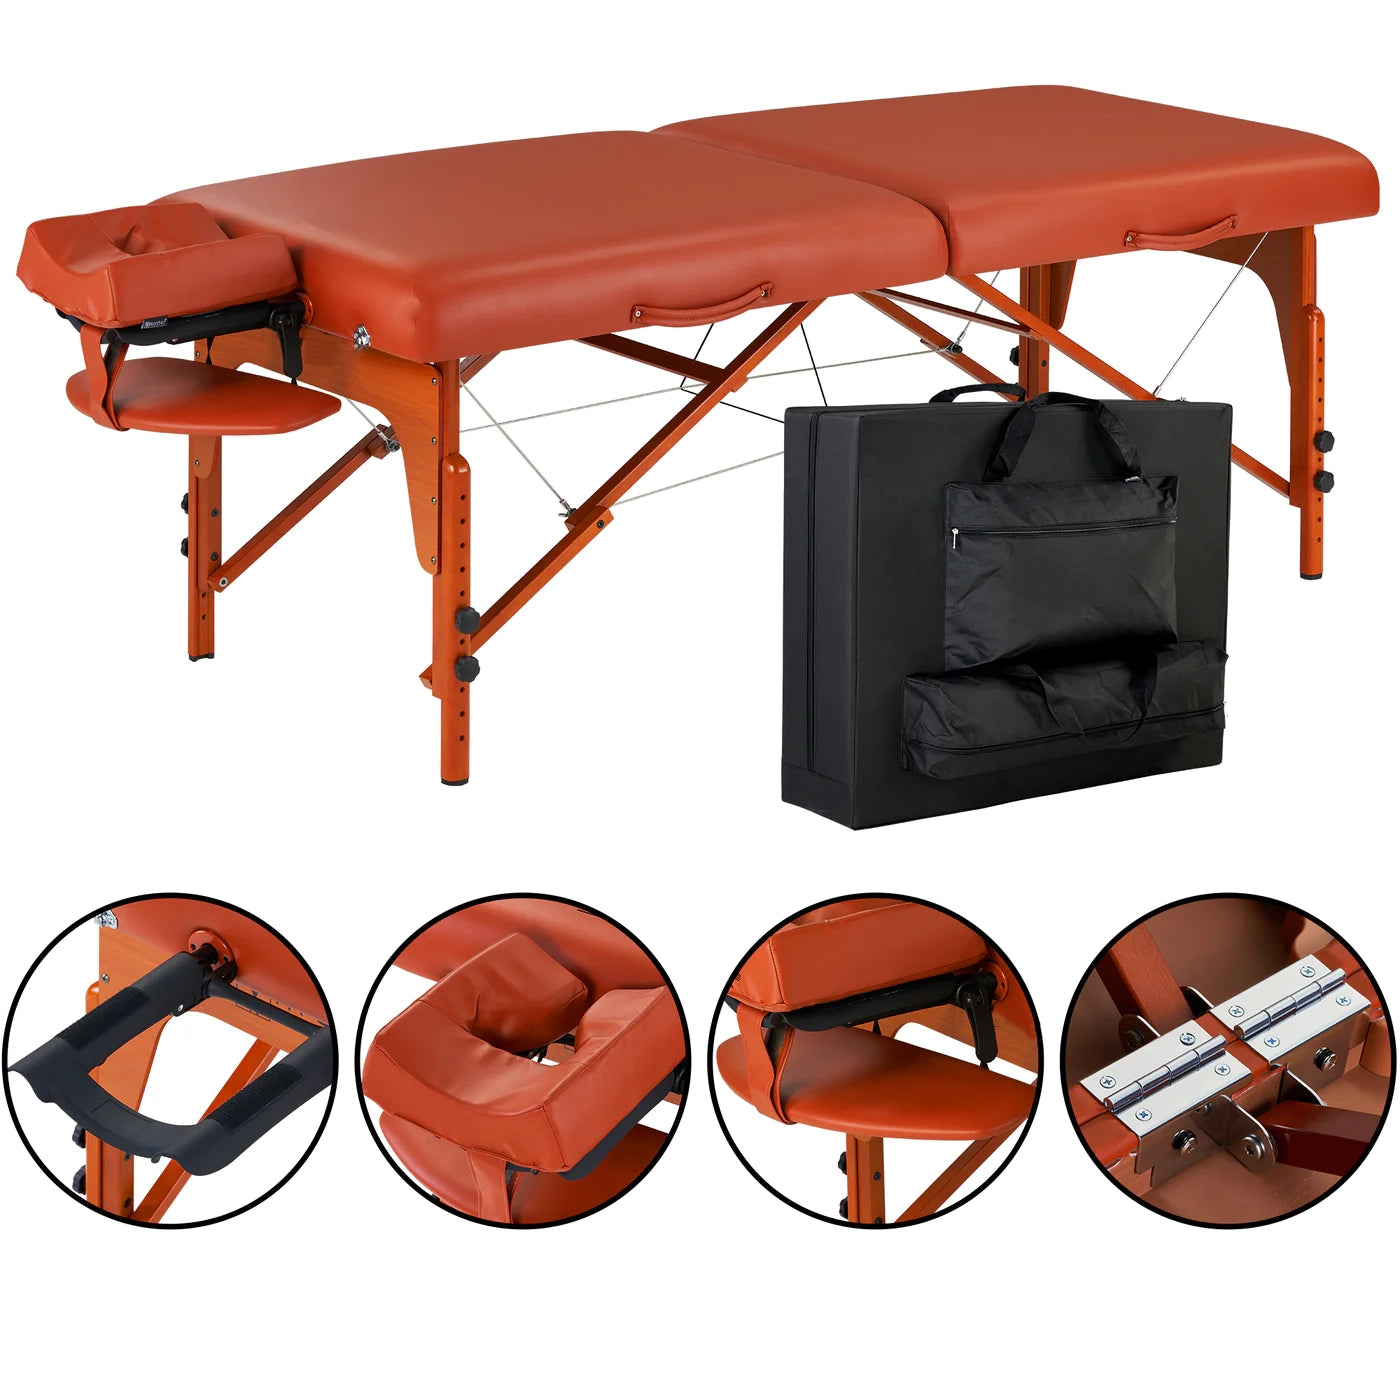 Bella2bello 31" SANTANA™ Portable Massage Table Package with Therma-Top